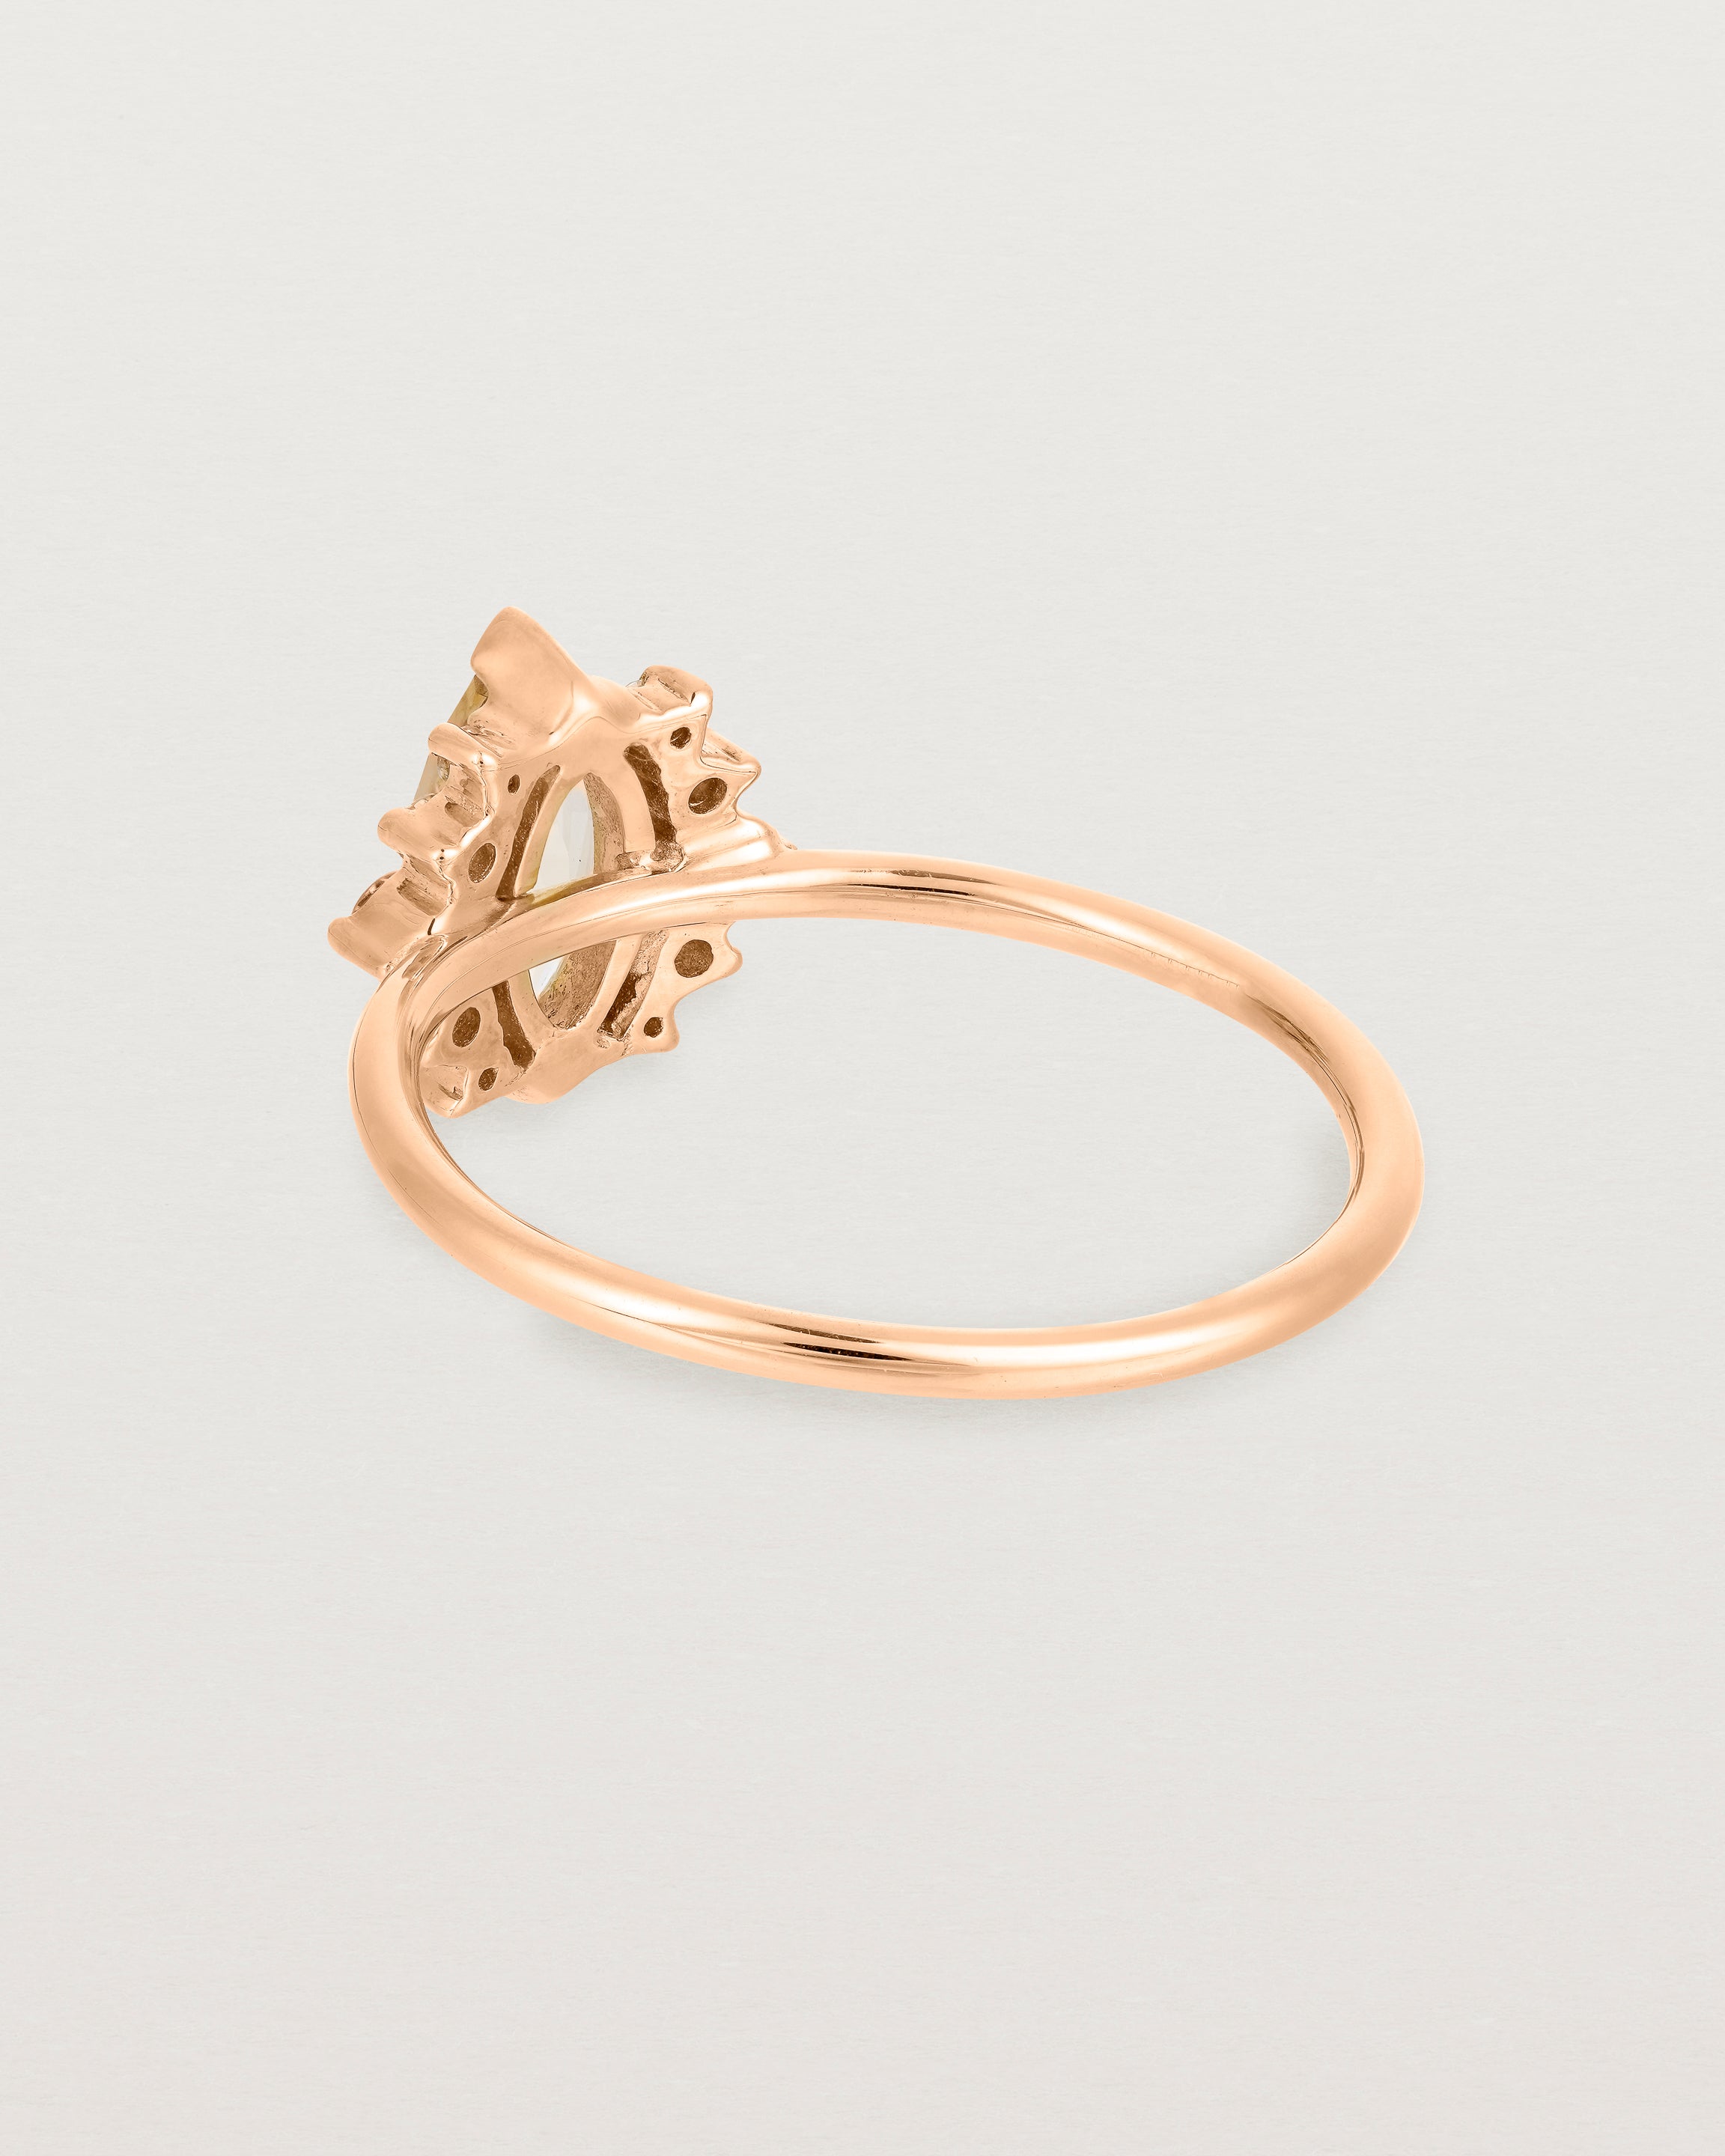 A rose gold ring featuring a marquise champagne quartz with a halo of white diamonds